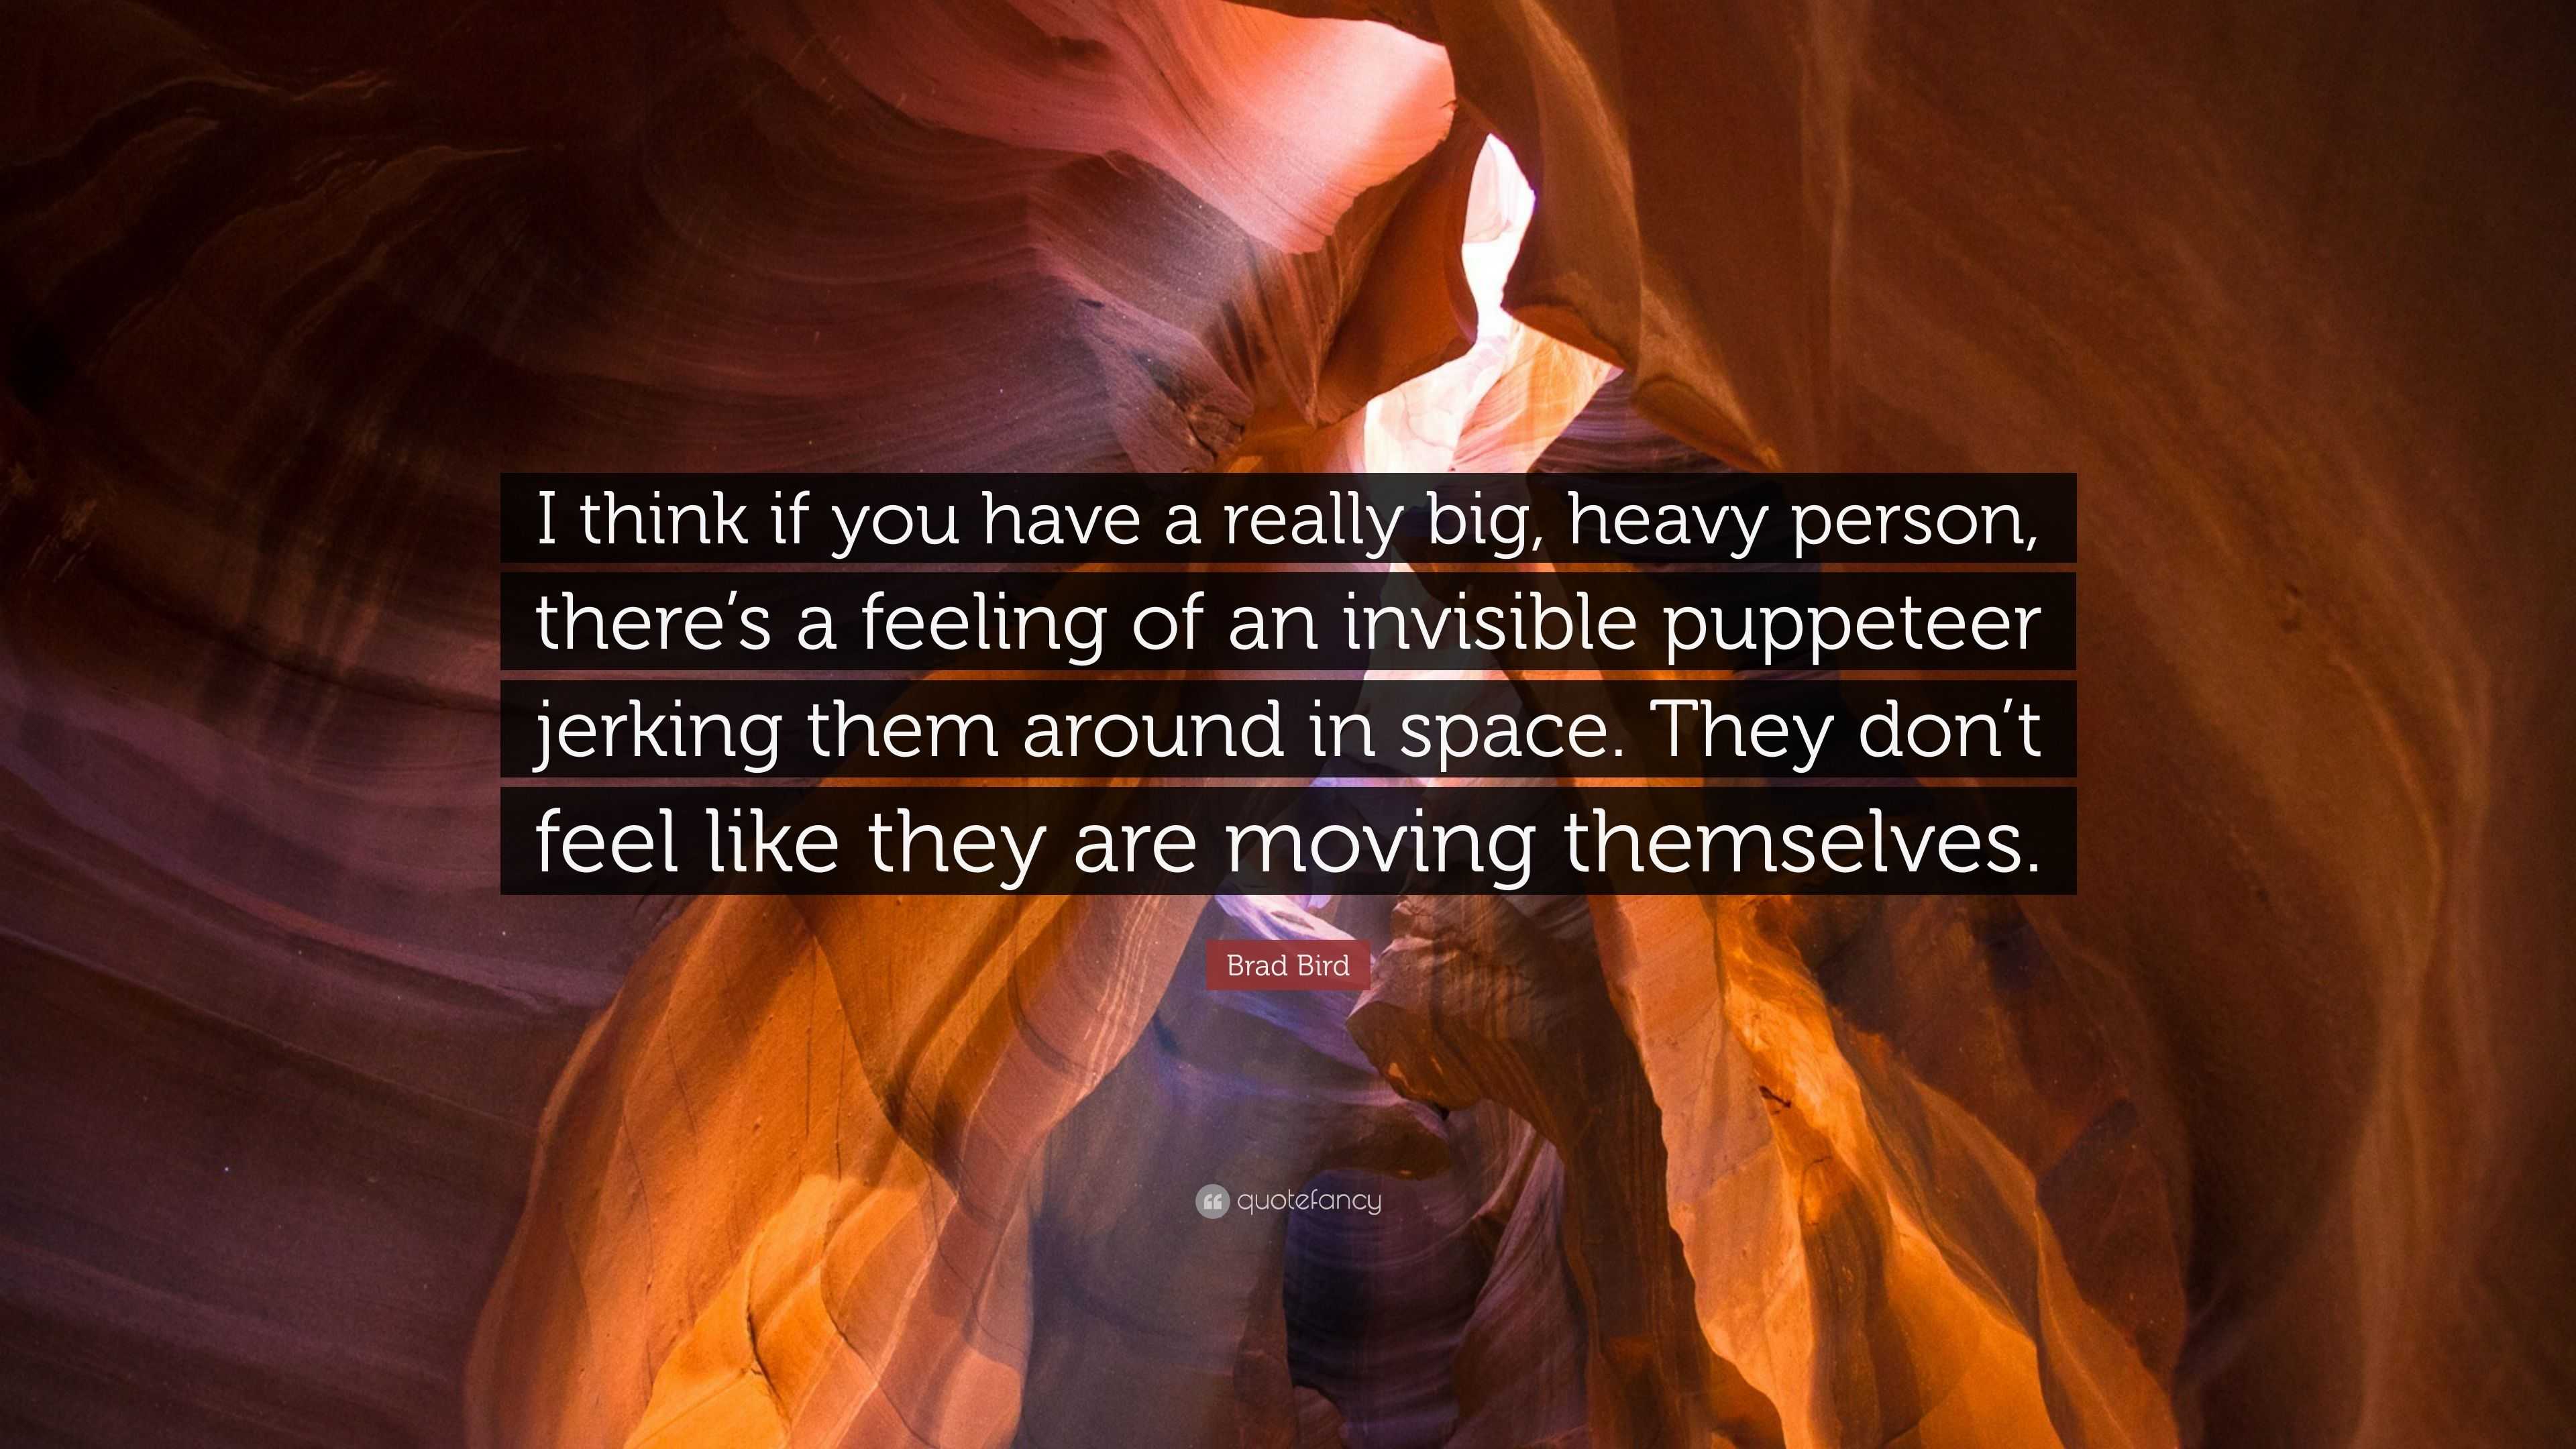 https://quotefancy.com/media/wallpaper/3840x2160/4473263-Brad-Bird-Quote-I-think-if-you-have-a-really-big-heavy-person.jpg